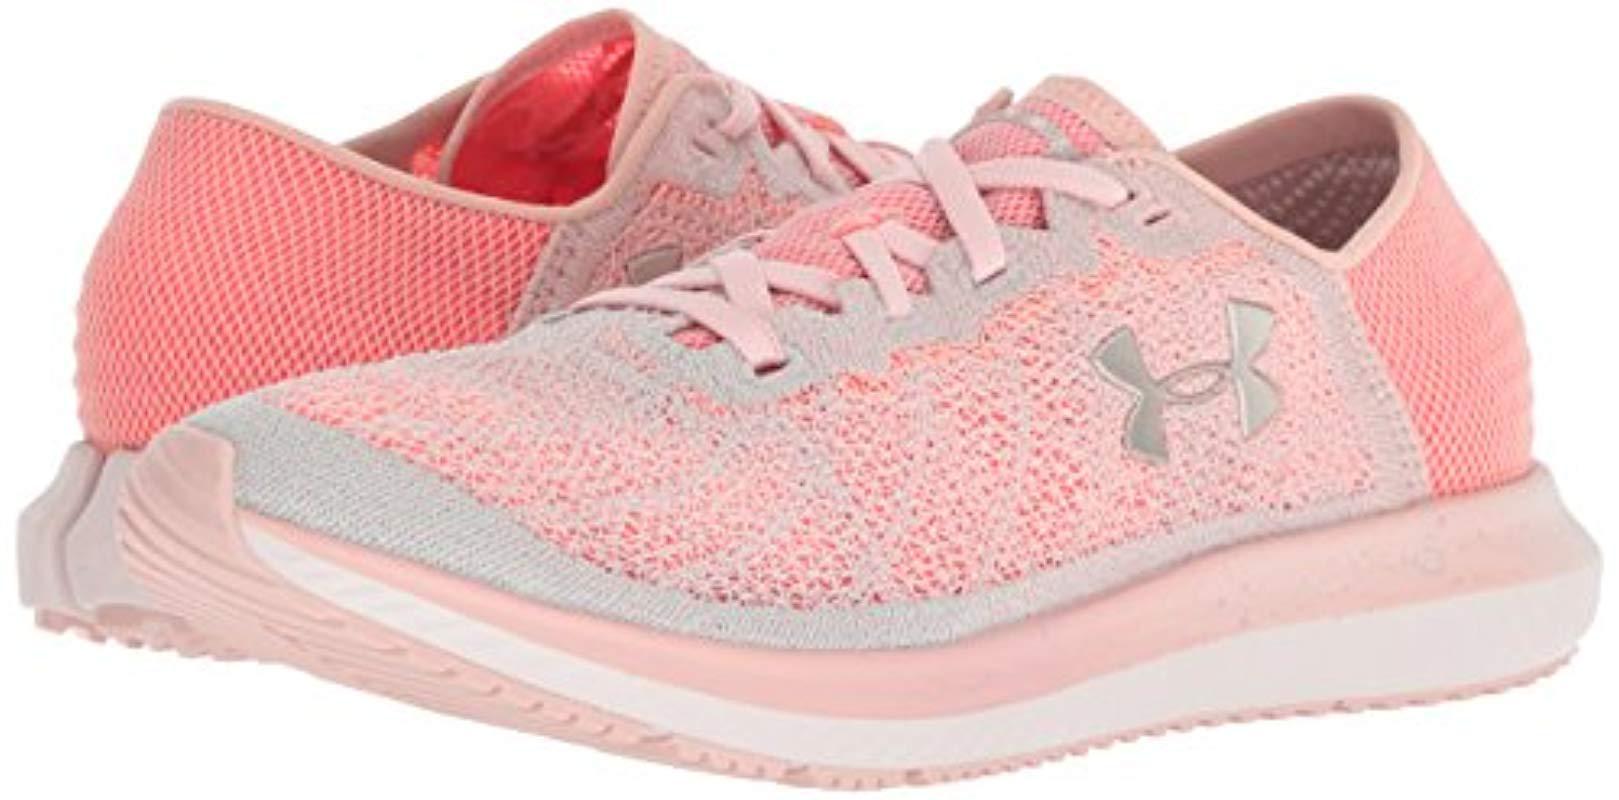 Under Armour Rubber Ua W Blur Training Shoes in Pink - Save 22% - Lyst